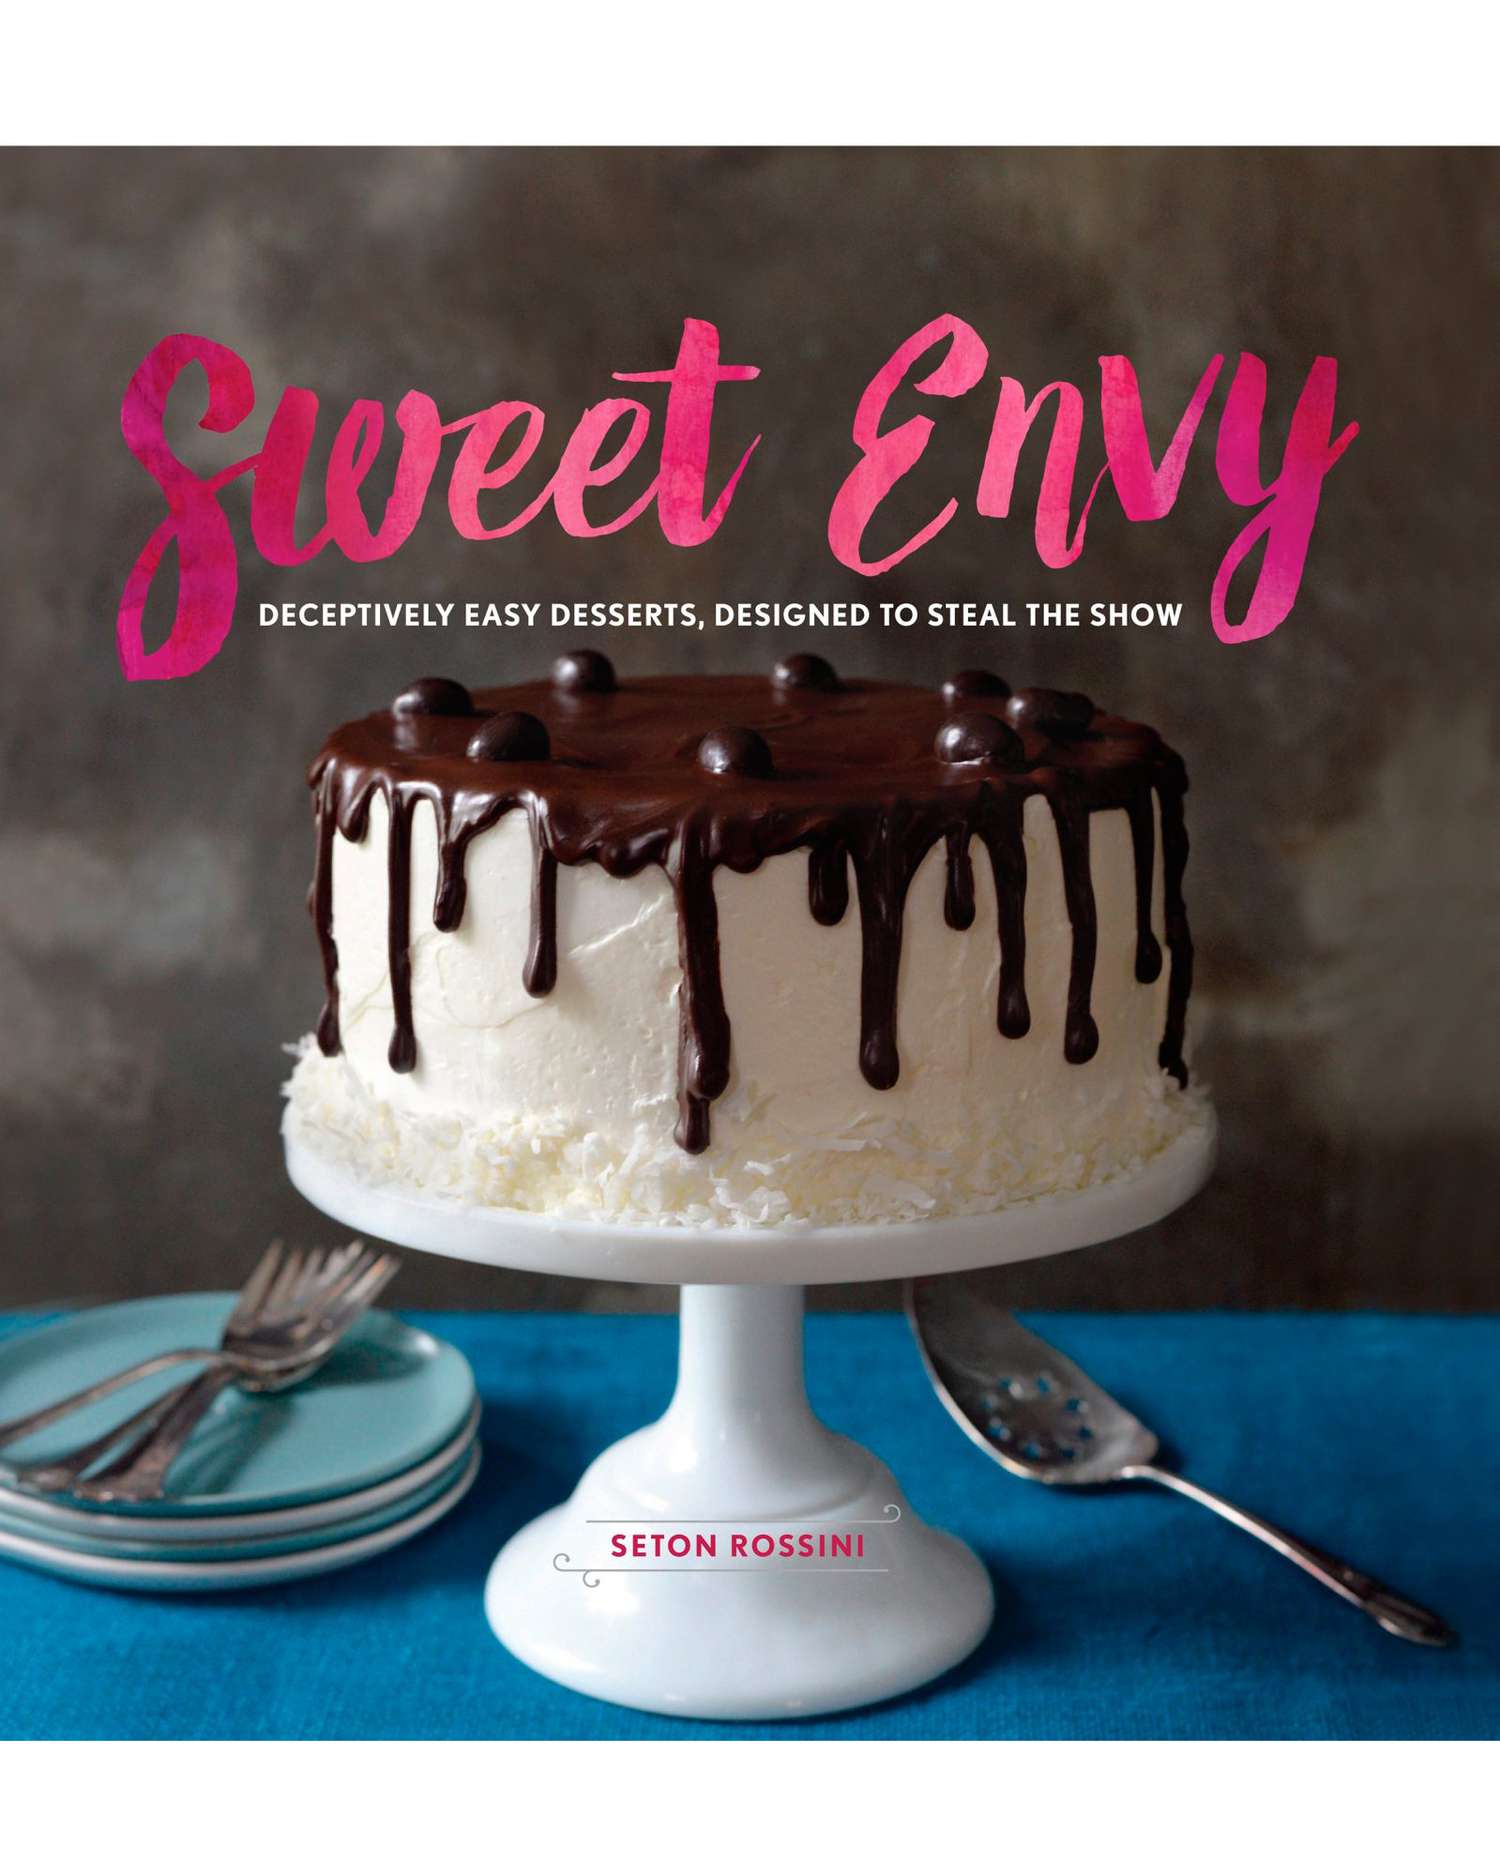 Sweet Envy: Deceptively Easy Desserts, Designed to Steal the Show by Seton Hurson Rossini